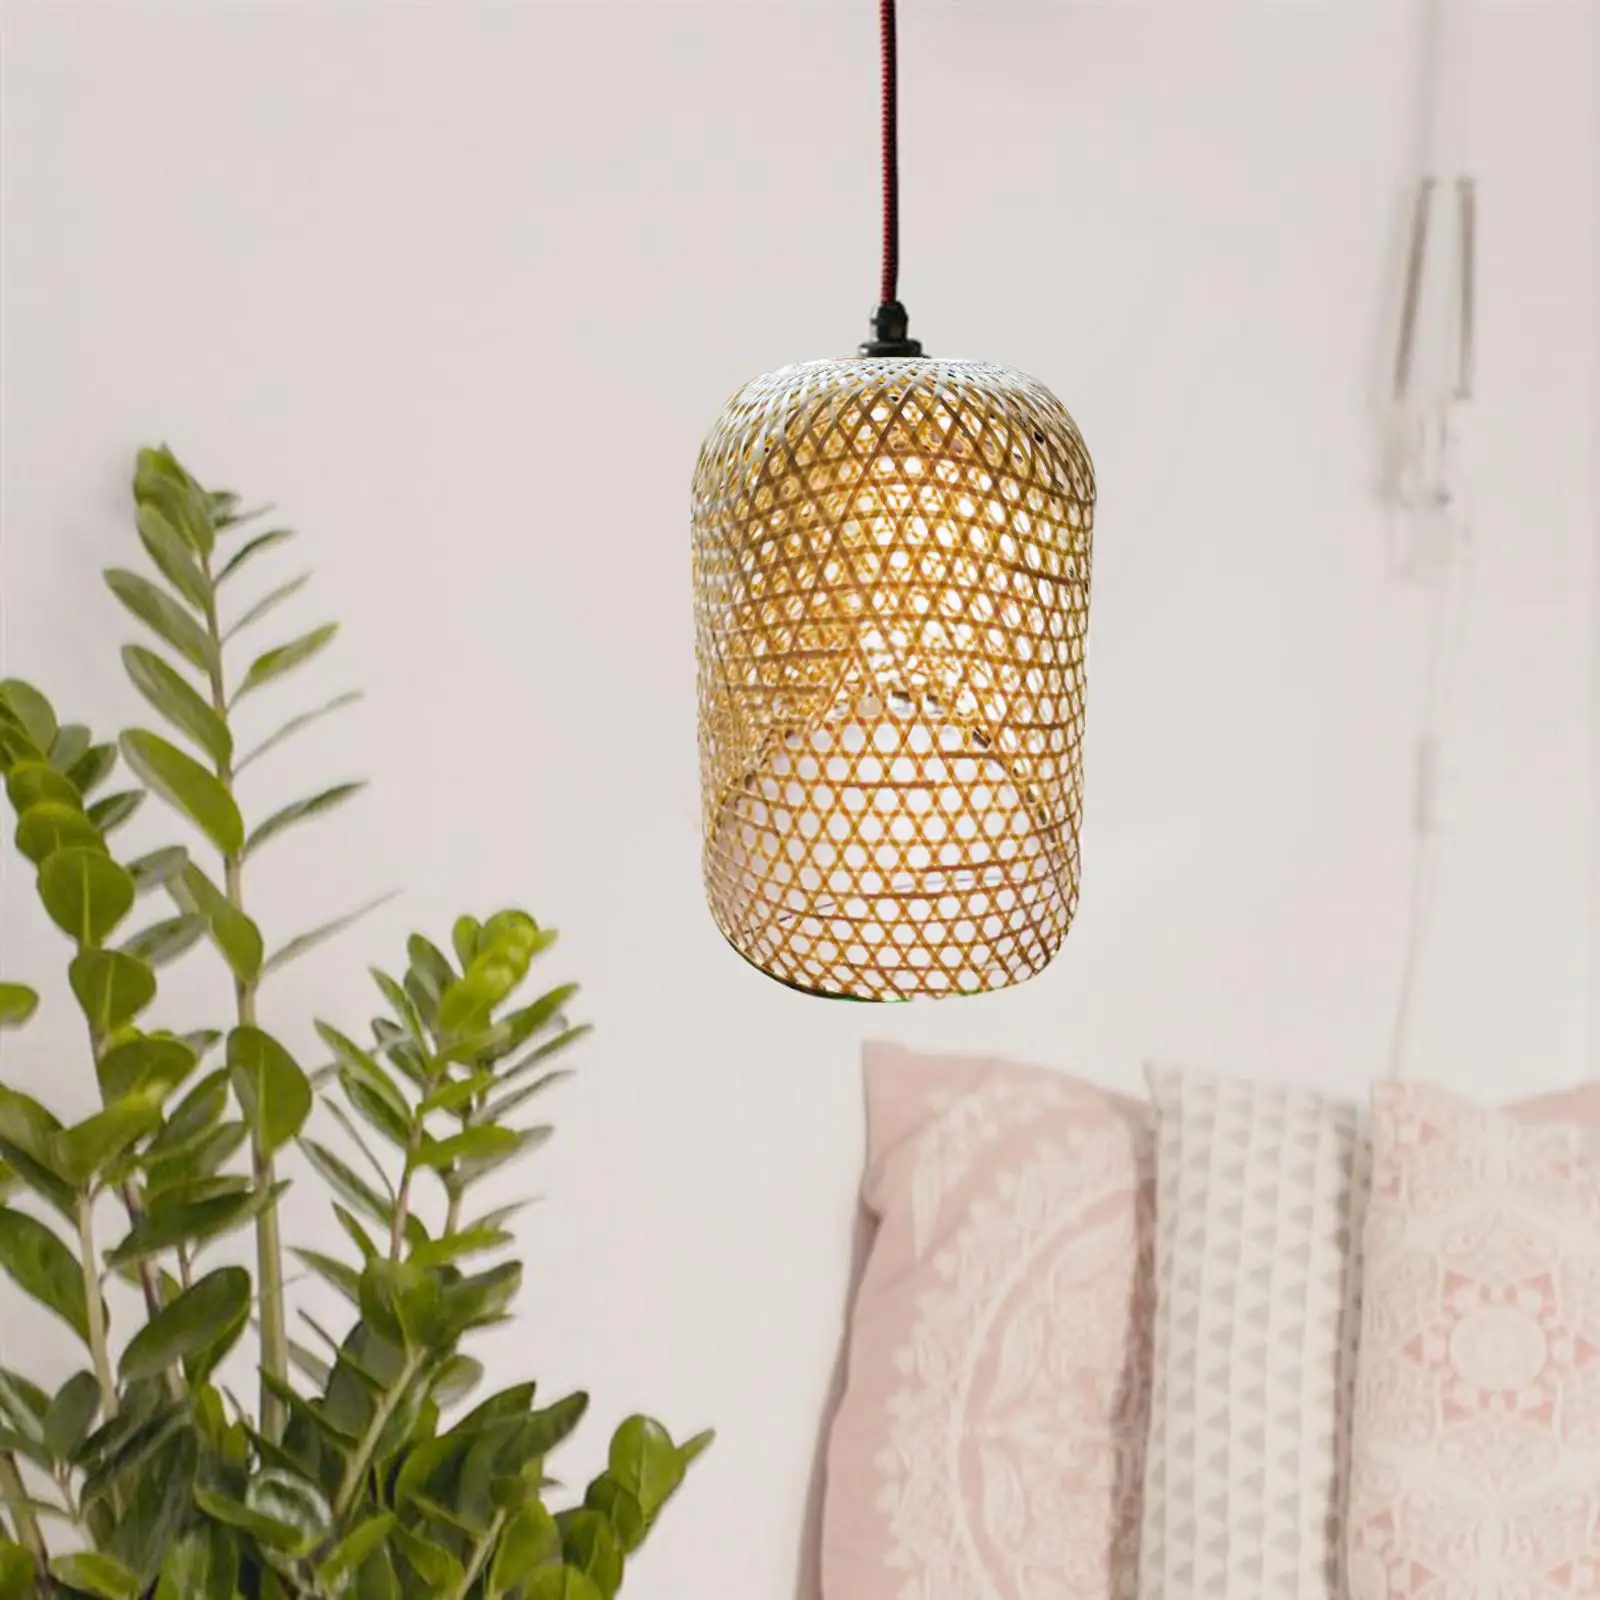 Weaving Bamboo Lamp Shade Crafts Hanging Decorative Ornament Lantern Lamp Accessory for Kitchen Hotel Cafe Farm Decor